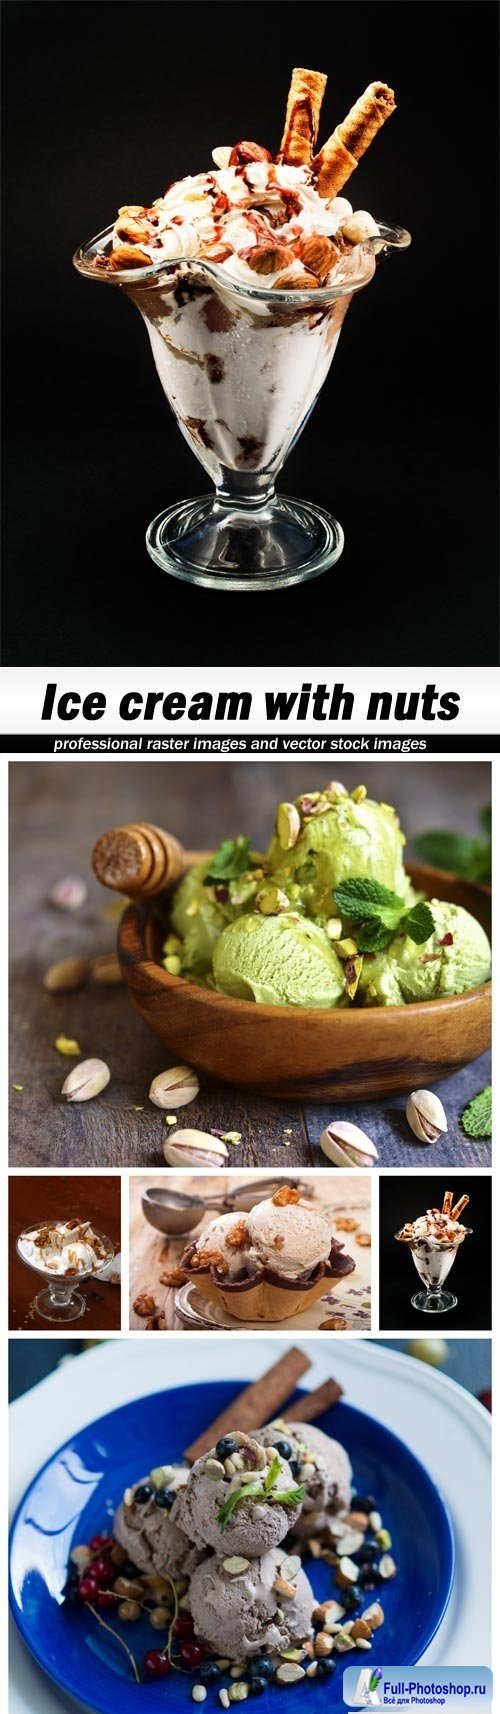 Ice cream with nuts